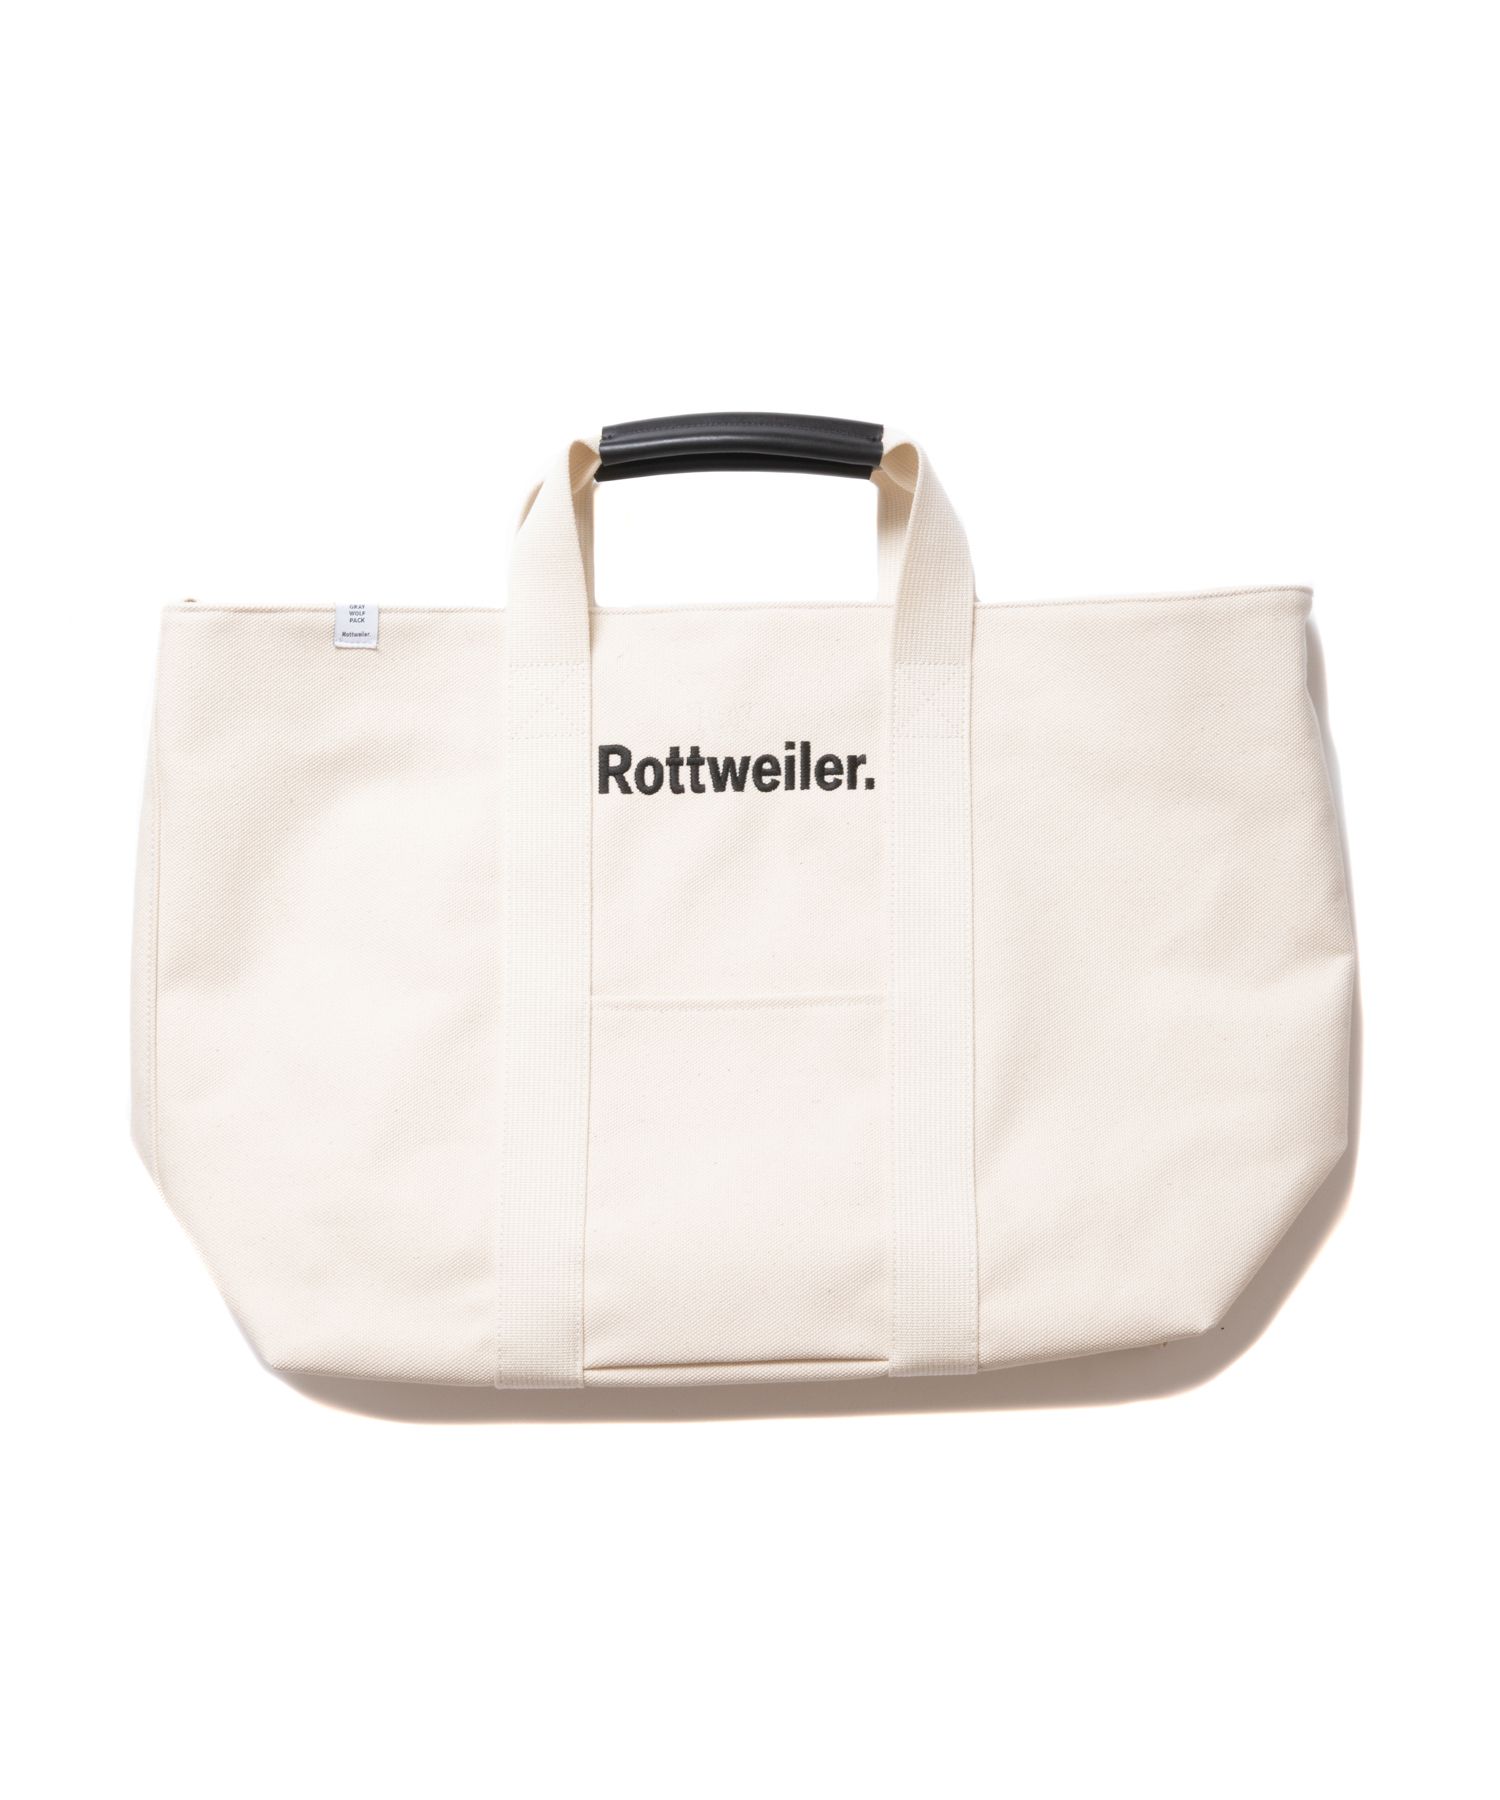 ROTTWEILER - CANVAS TOTE BAG LARGE (WHITE) / 定番キャンバストート